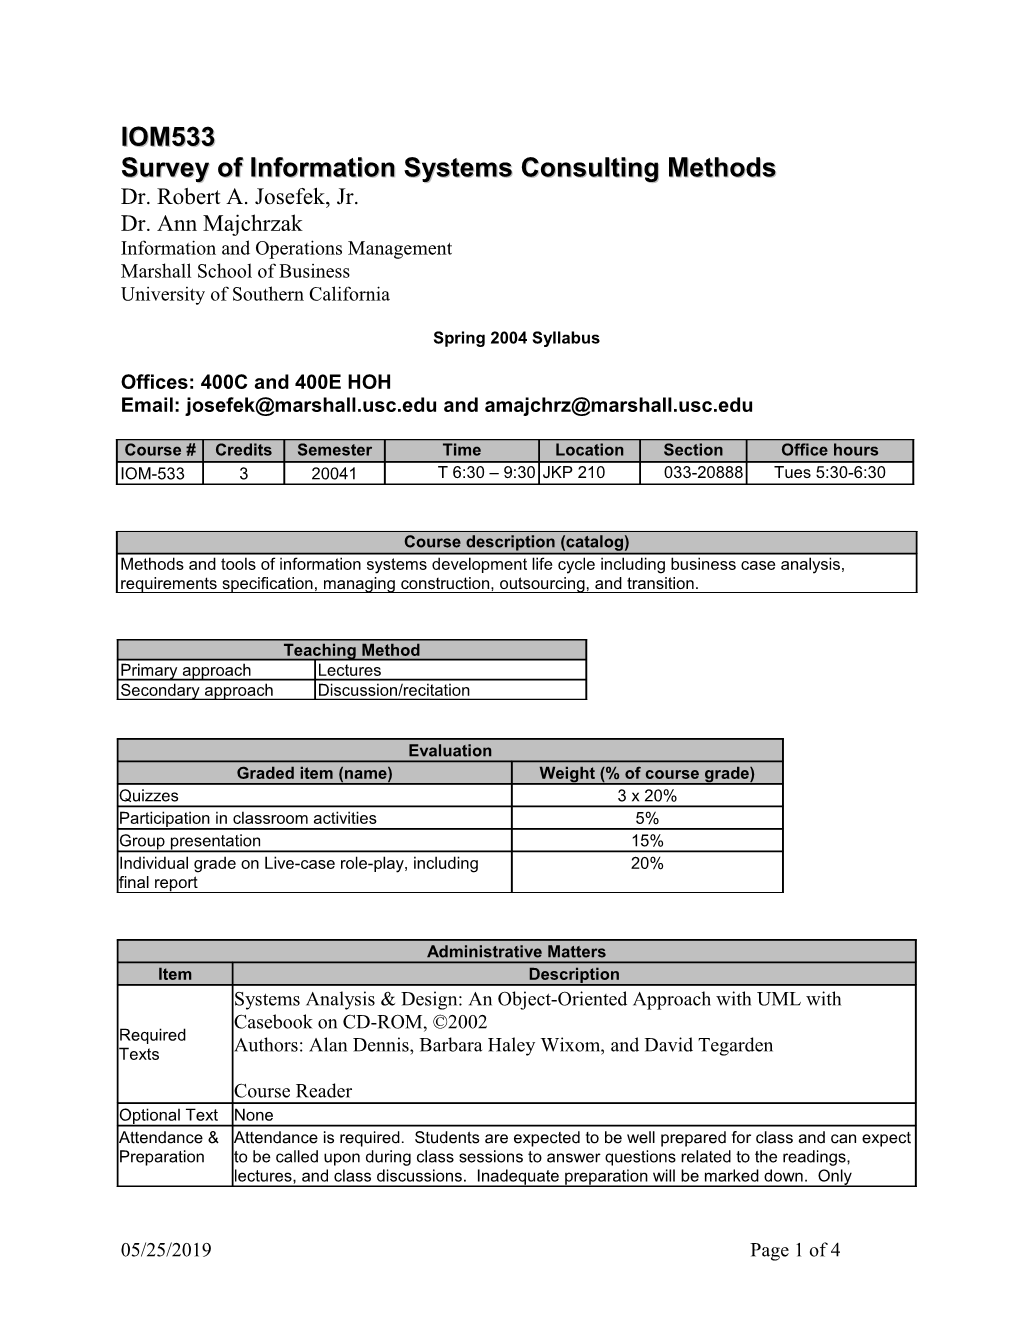 Survey of Information Systems Consulting Methods